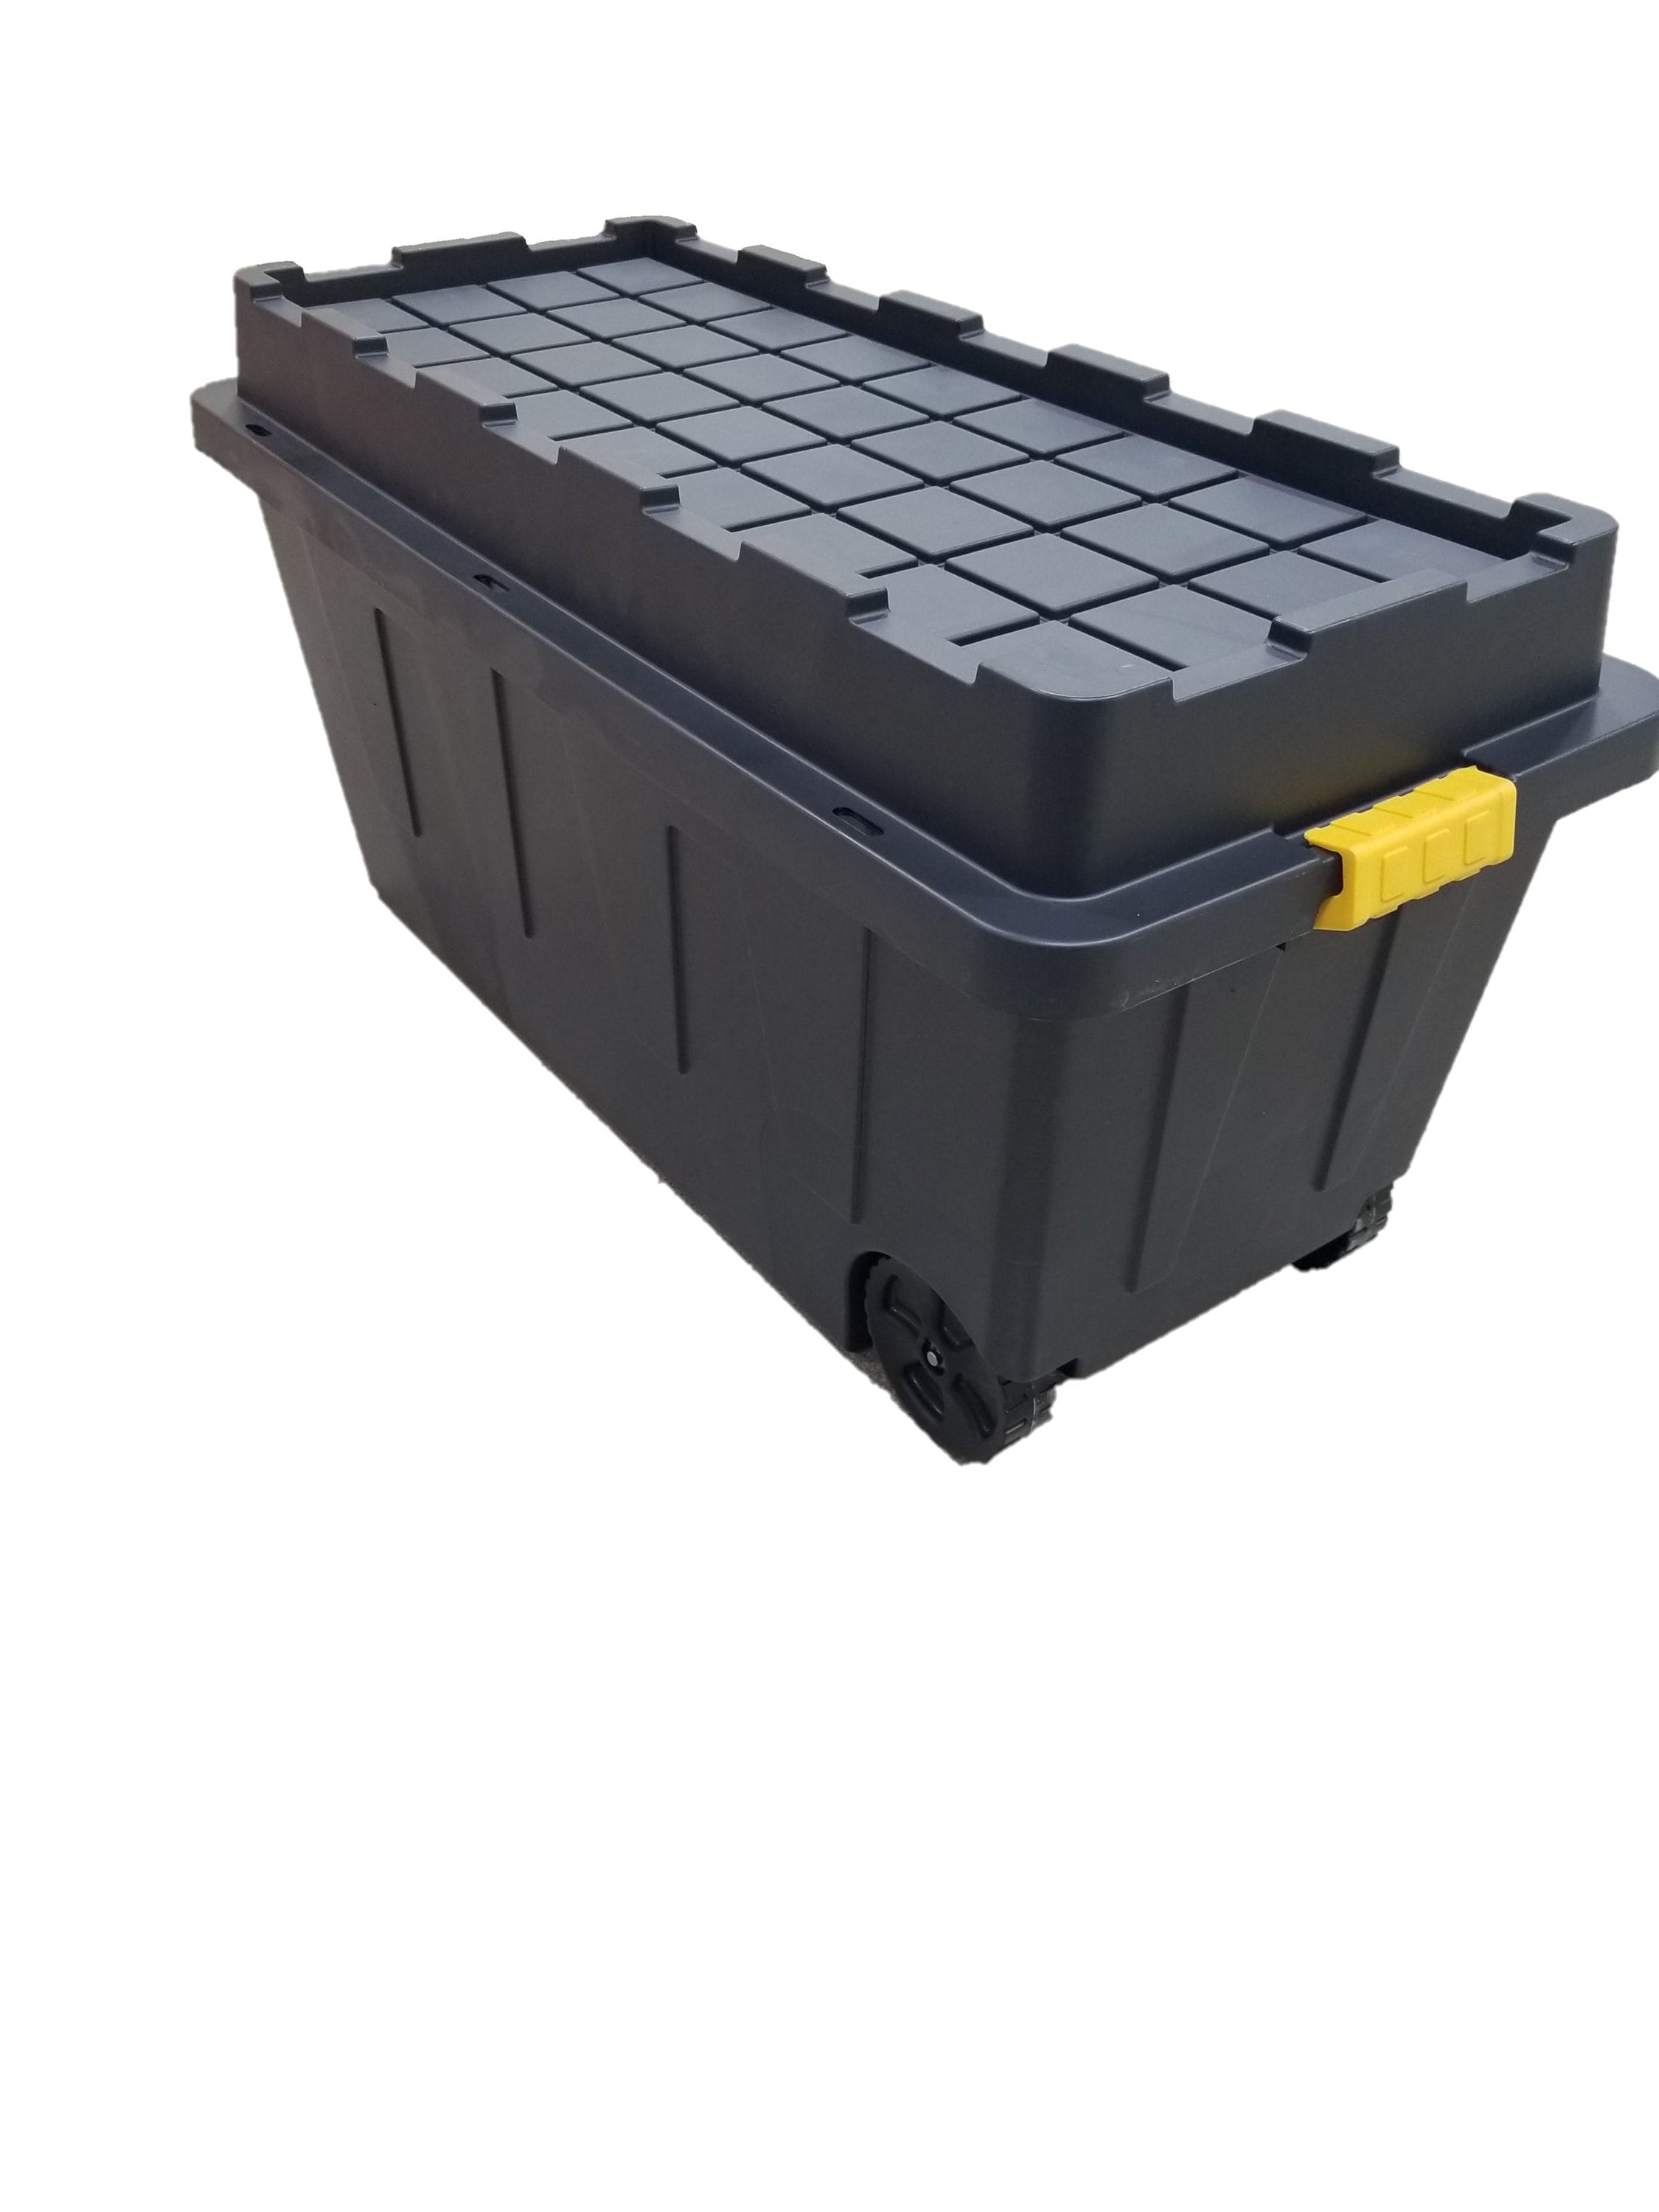 1 Black 64L Recycled Plastic Heavy Duty Stacking Storage Box with Lid & Handles 